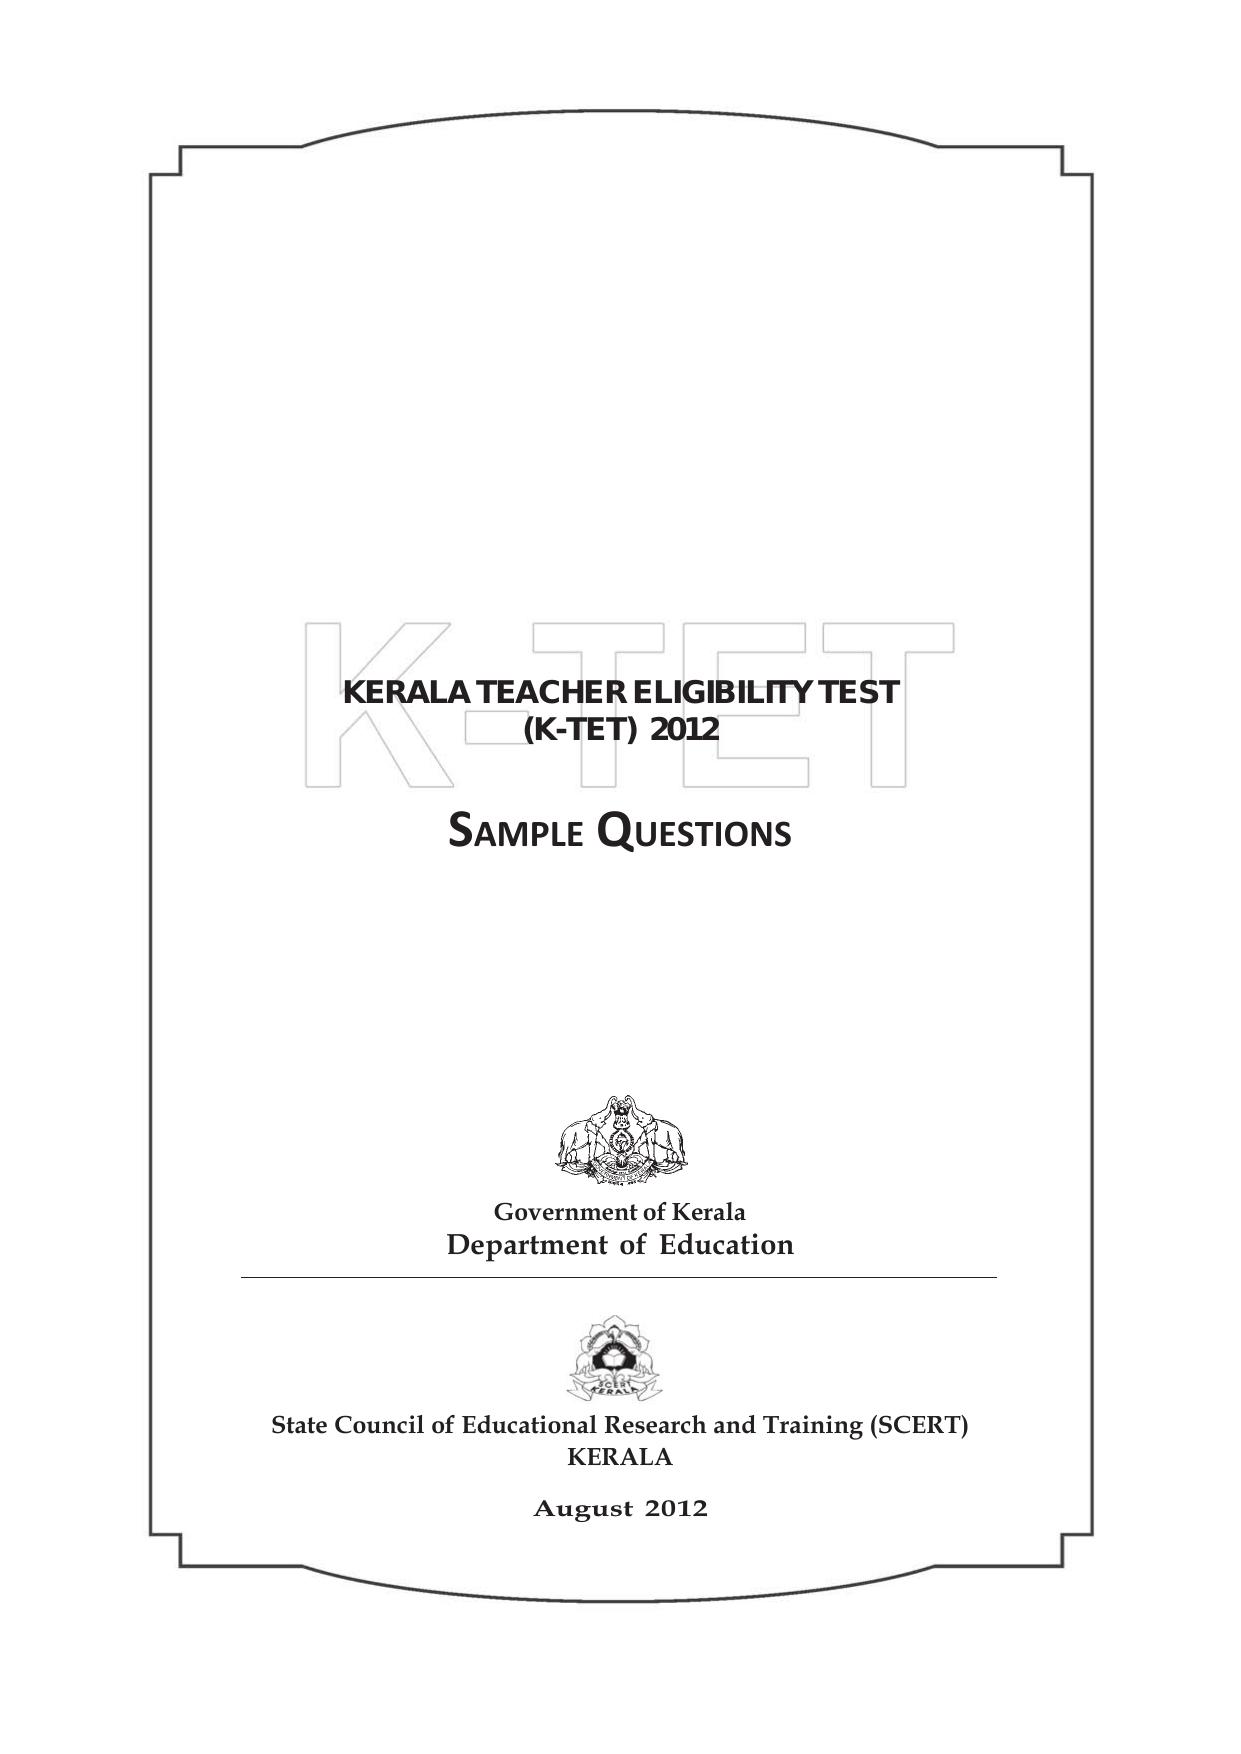 KTET Category 1 - Lower Primary Teacher (Class 1-5) Exam Old Papers - Page 1